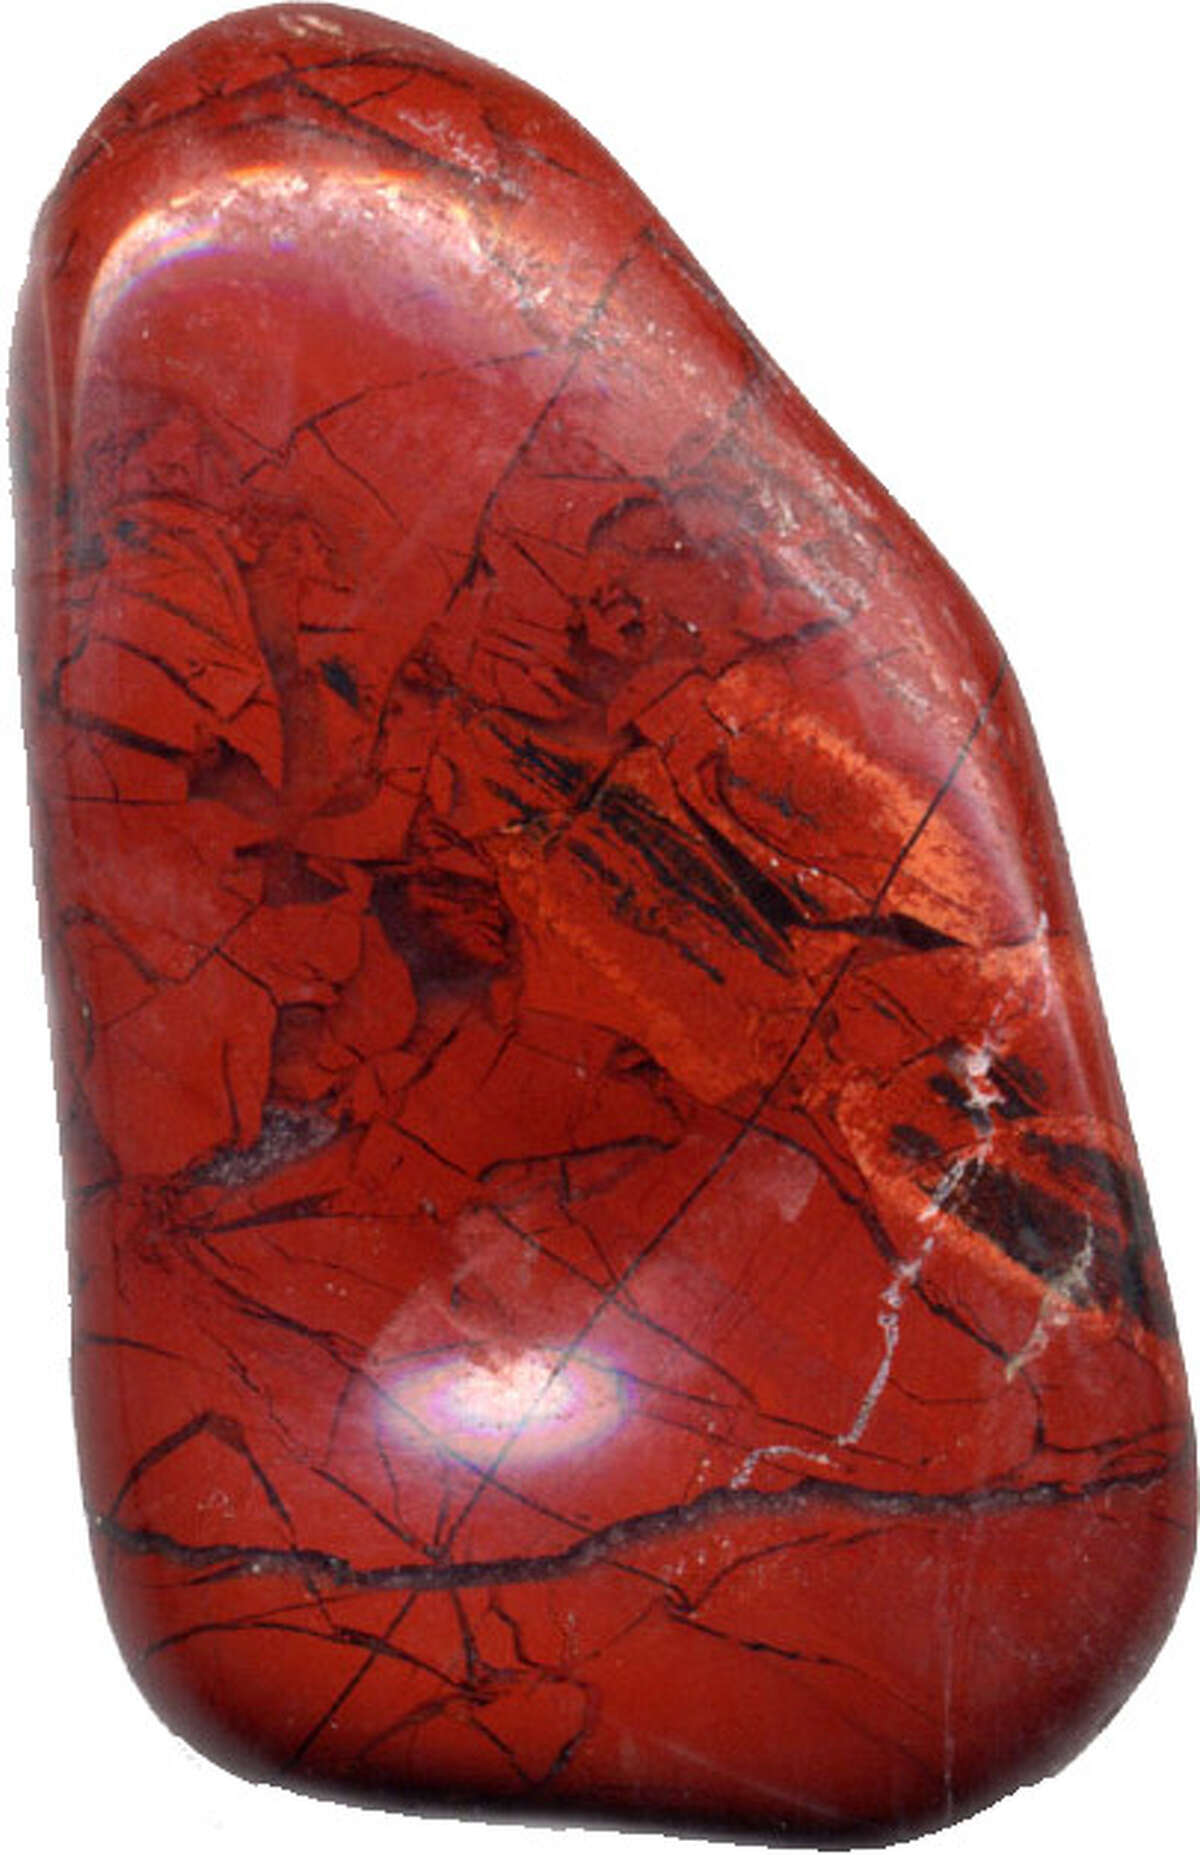 8) JASPER. It's a mineral and also the name of a notable American artist — Jasper Johns.